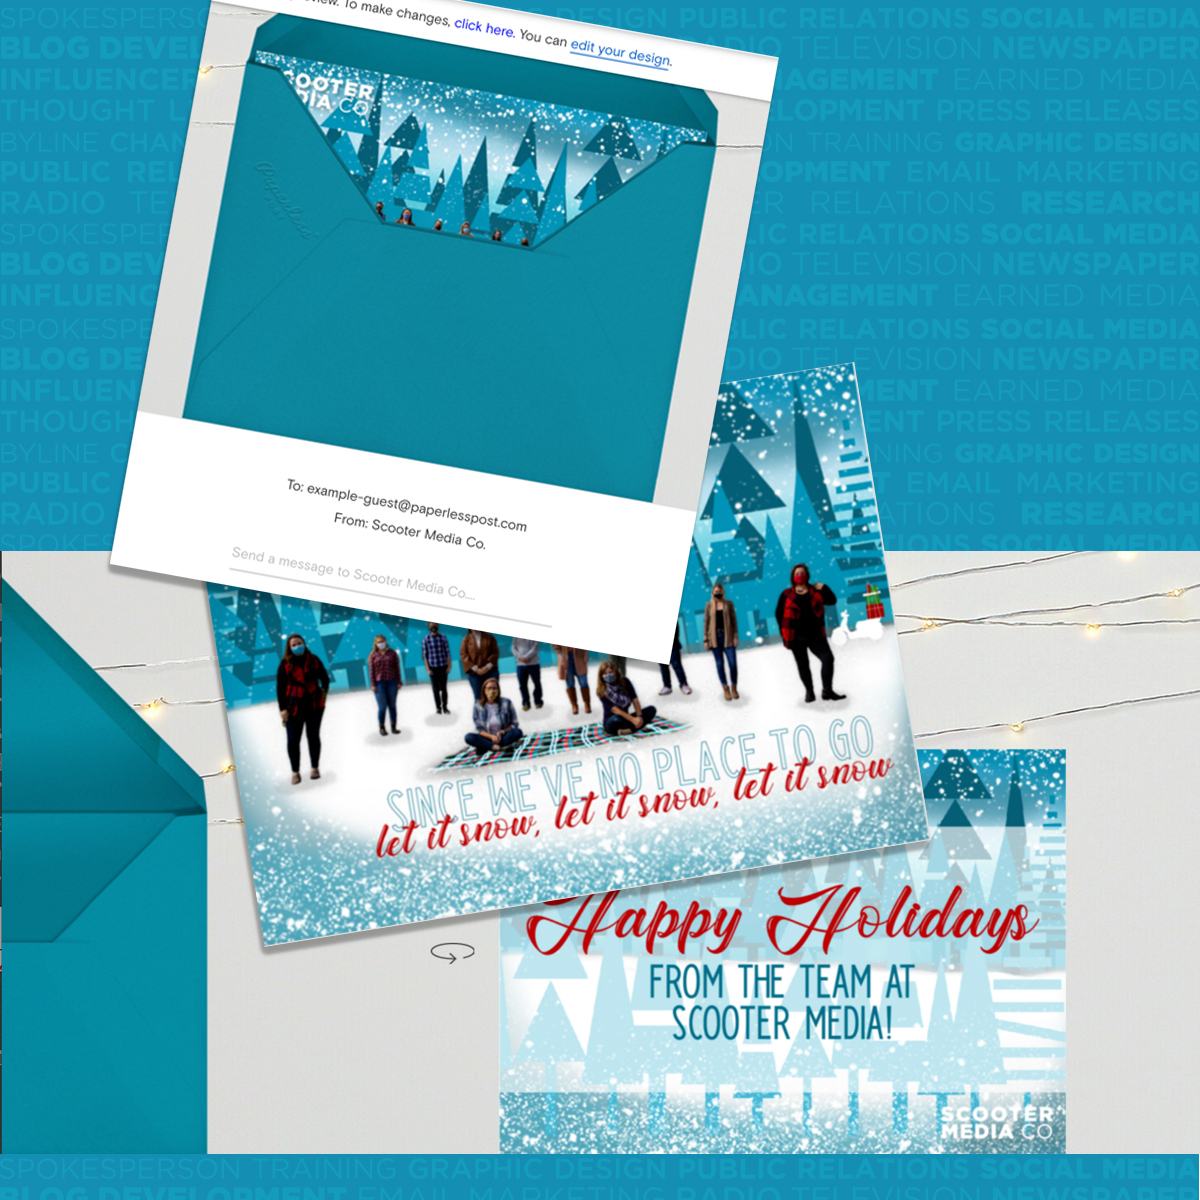 Example of a holiday card featuring the Scooter Media team